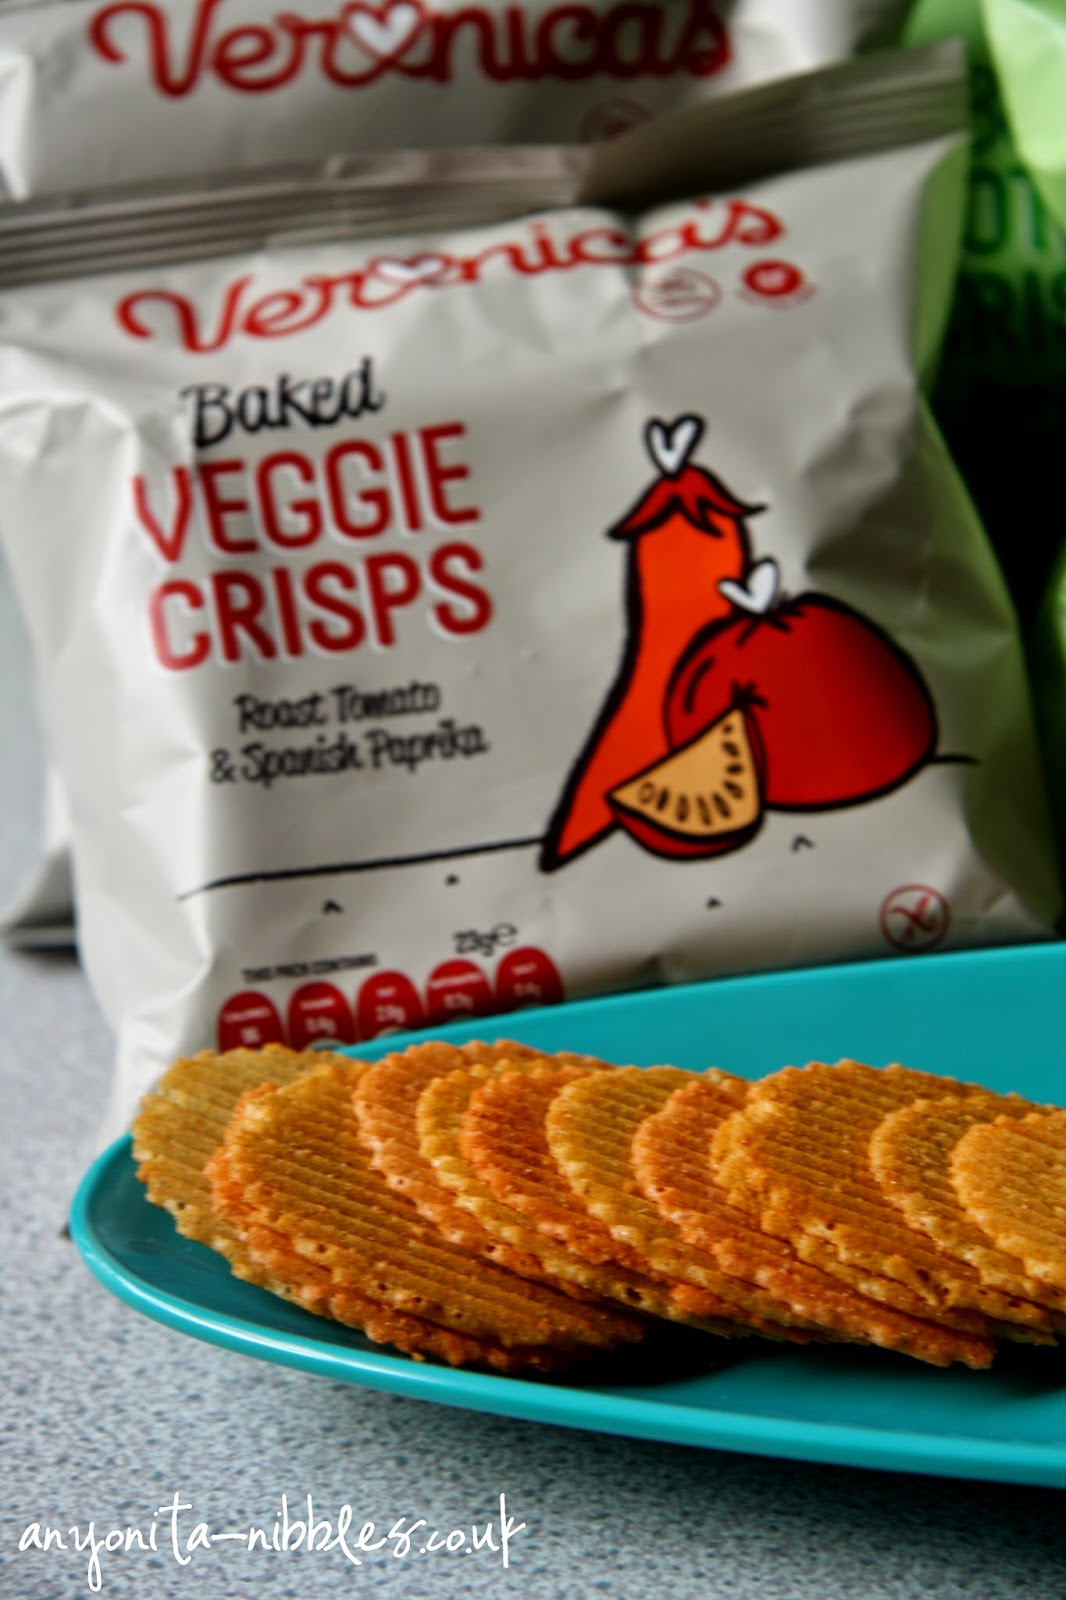 One of the veggie crisp range of Veronica's from Anyonita-nibbles.co.uk